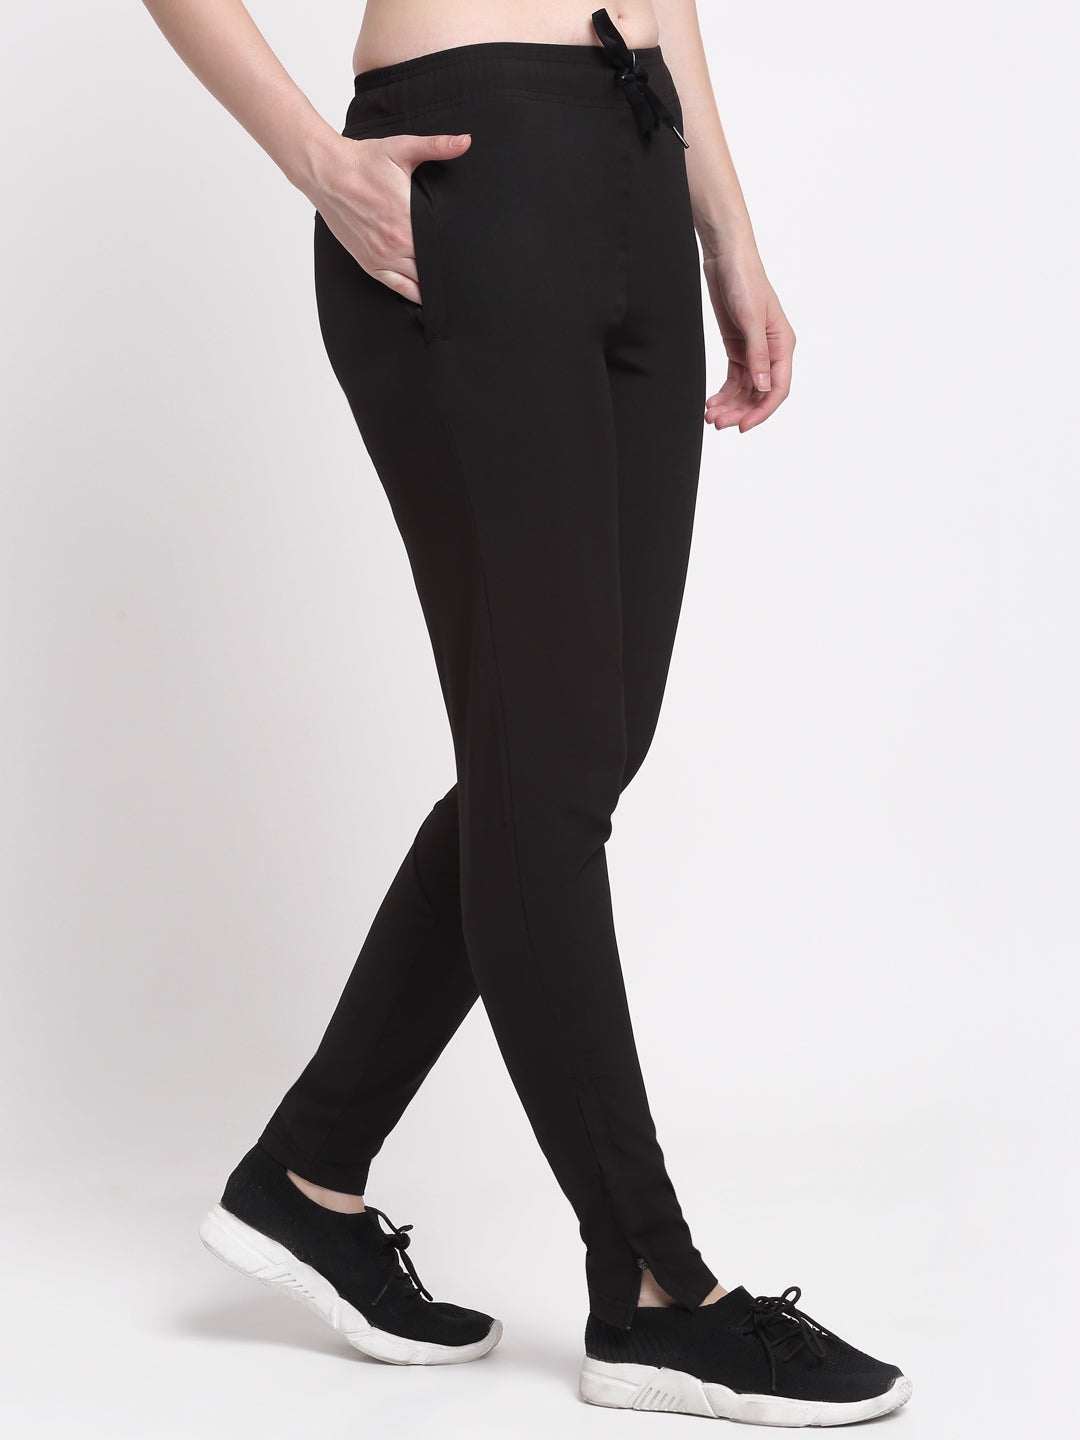 Casual Bootcut Yoga Pants for Women High Waisted V India | Ubuy